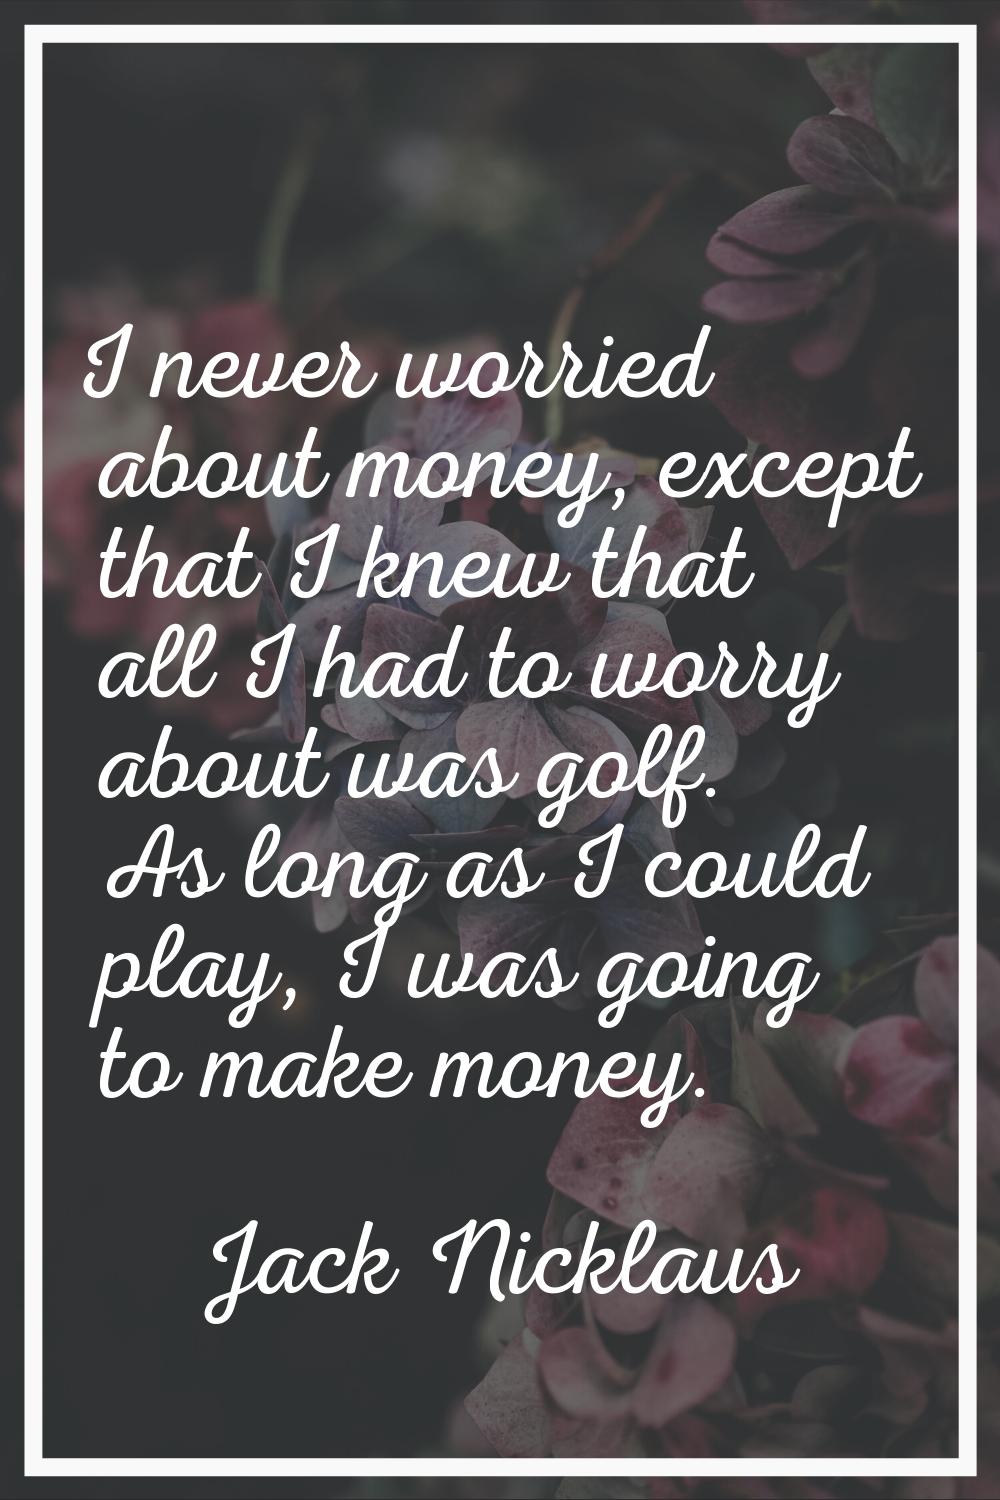 I never worried about money, except that I knew that all I had to worry about was golf. As long as 